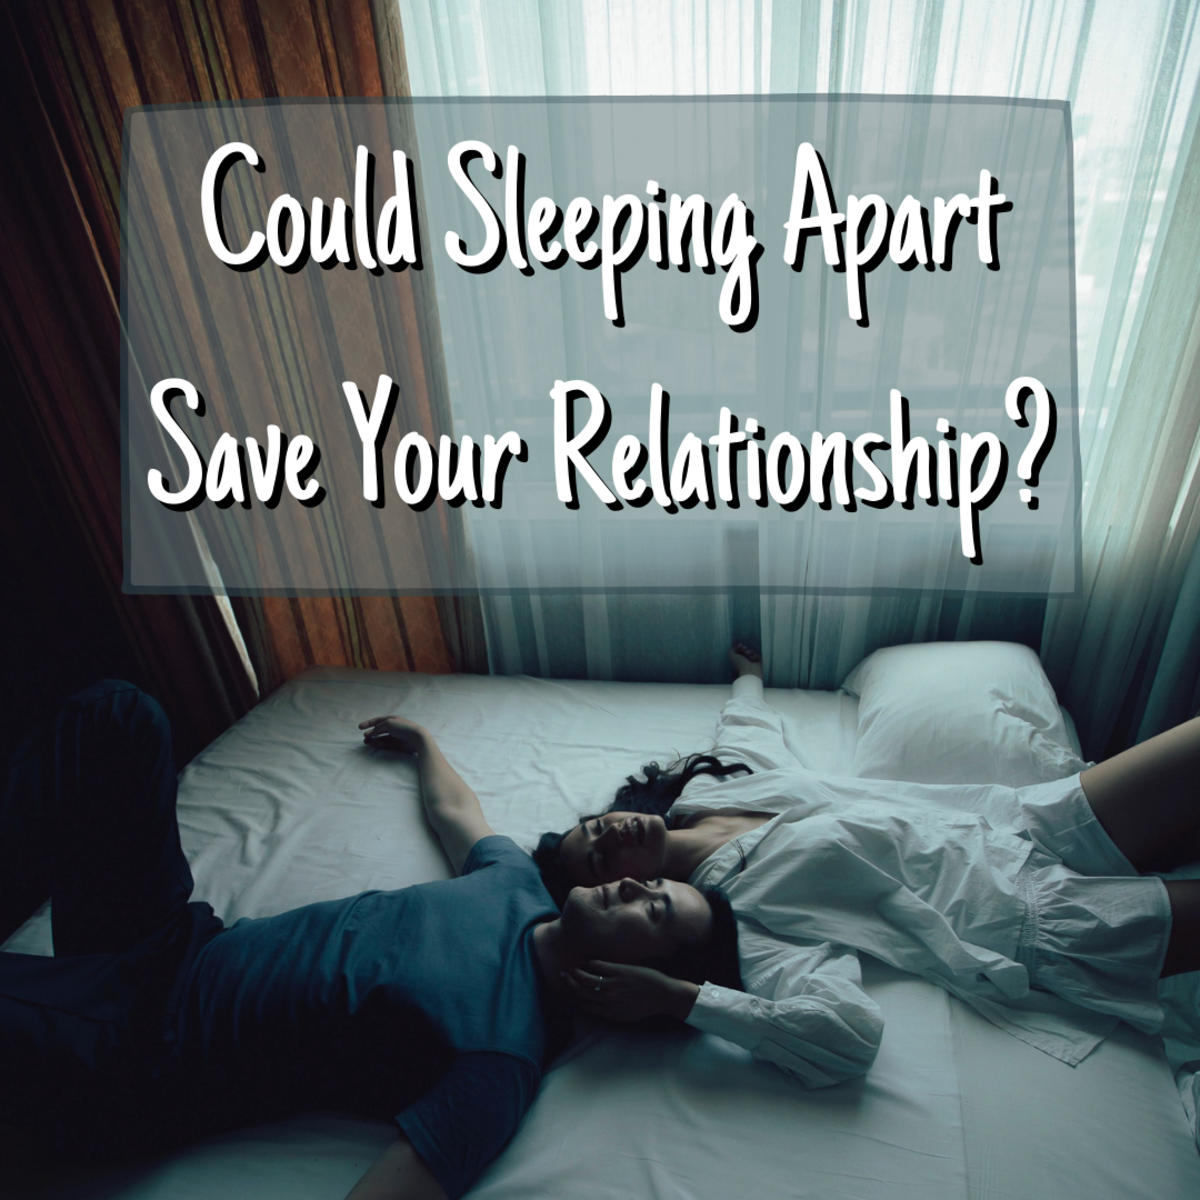 Sleeping Apart Could Save Your Relationship